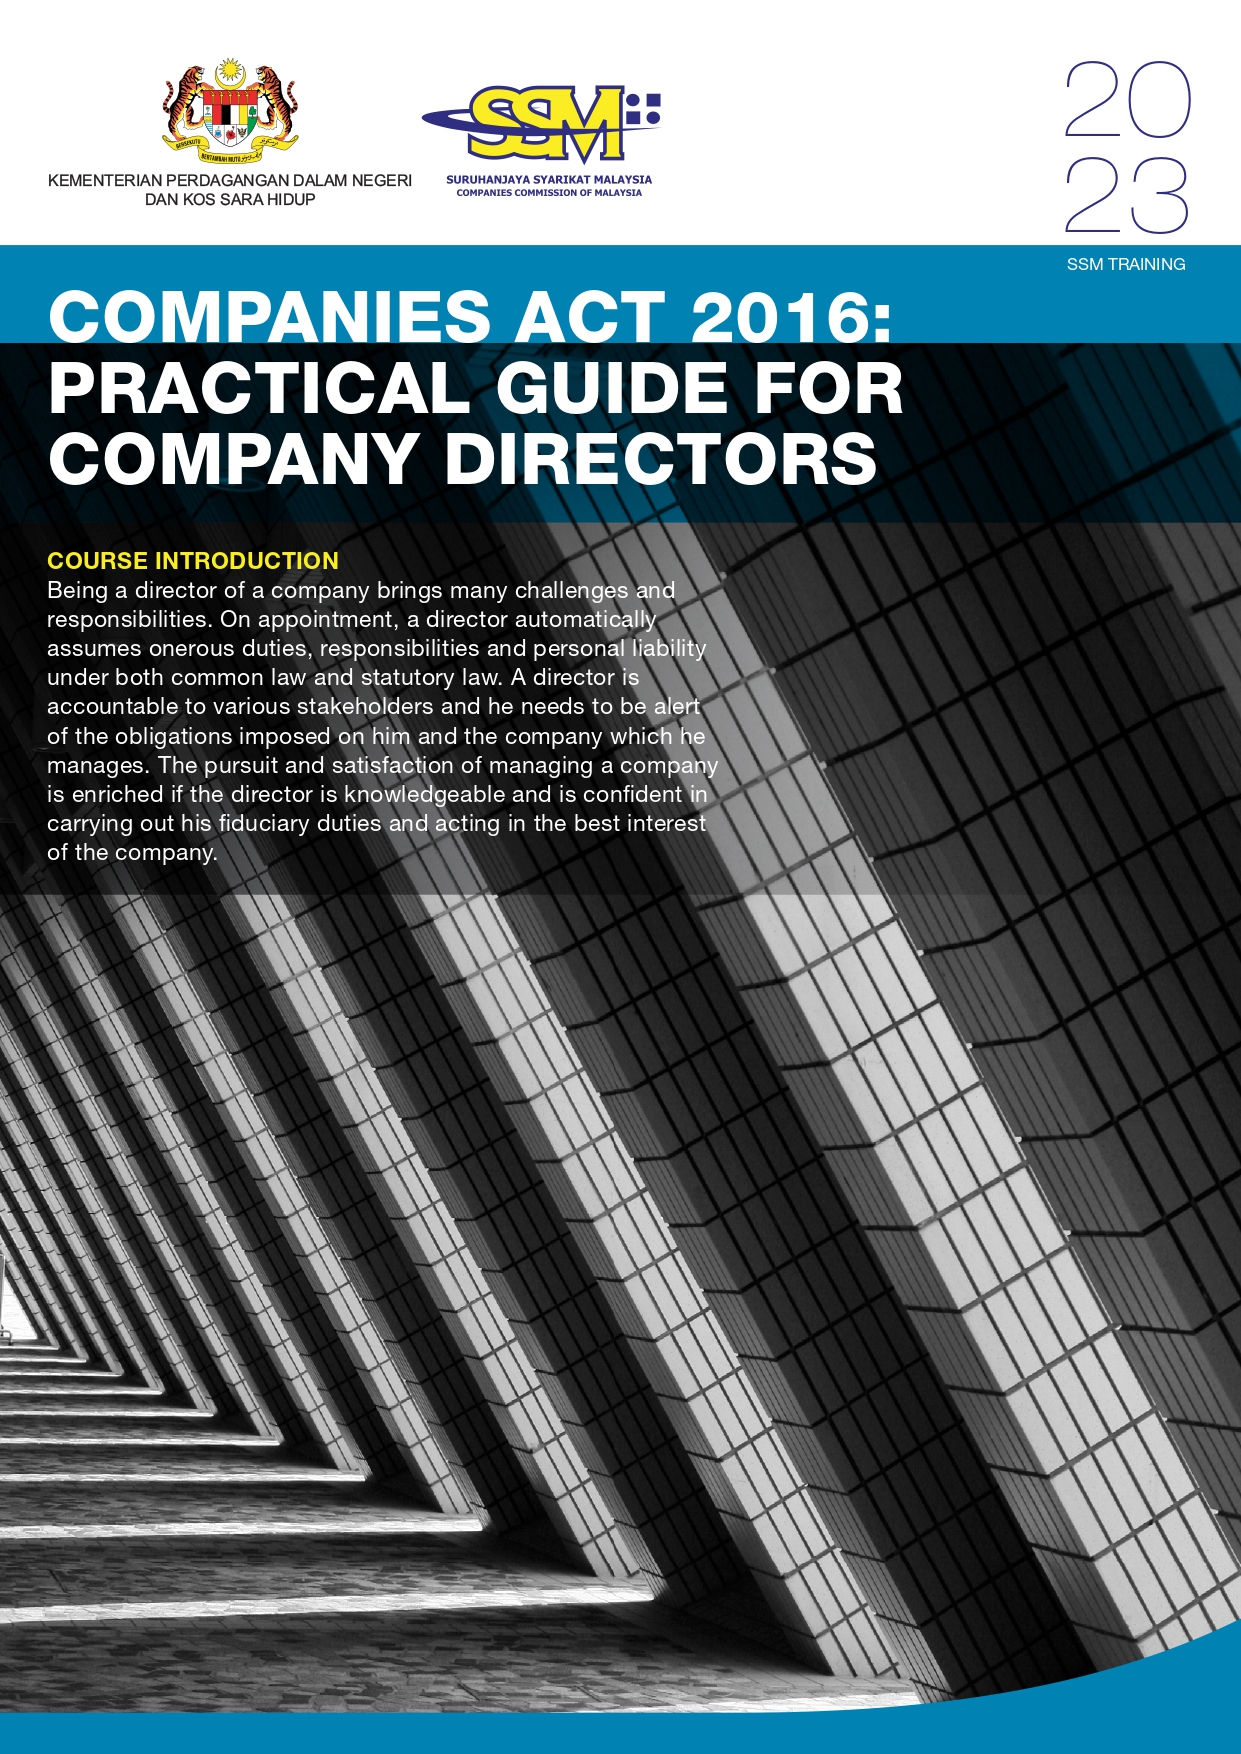 COMPANIES ACT 2016_PRACTICAL GUIDE FOR COMPANY DIRECTORS.jpg